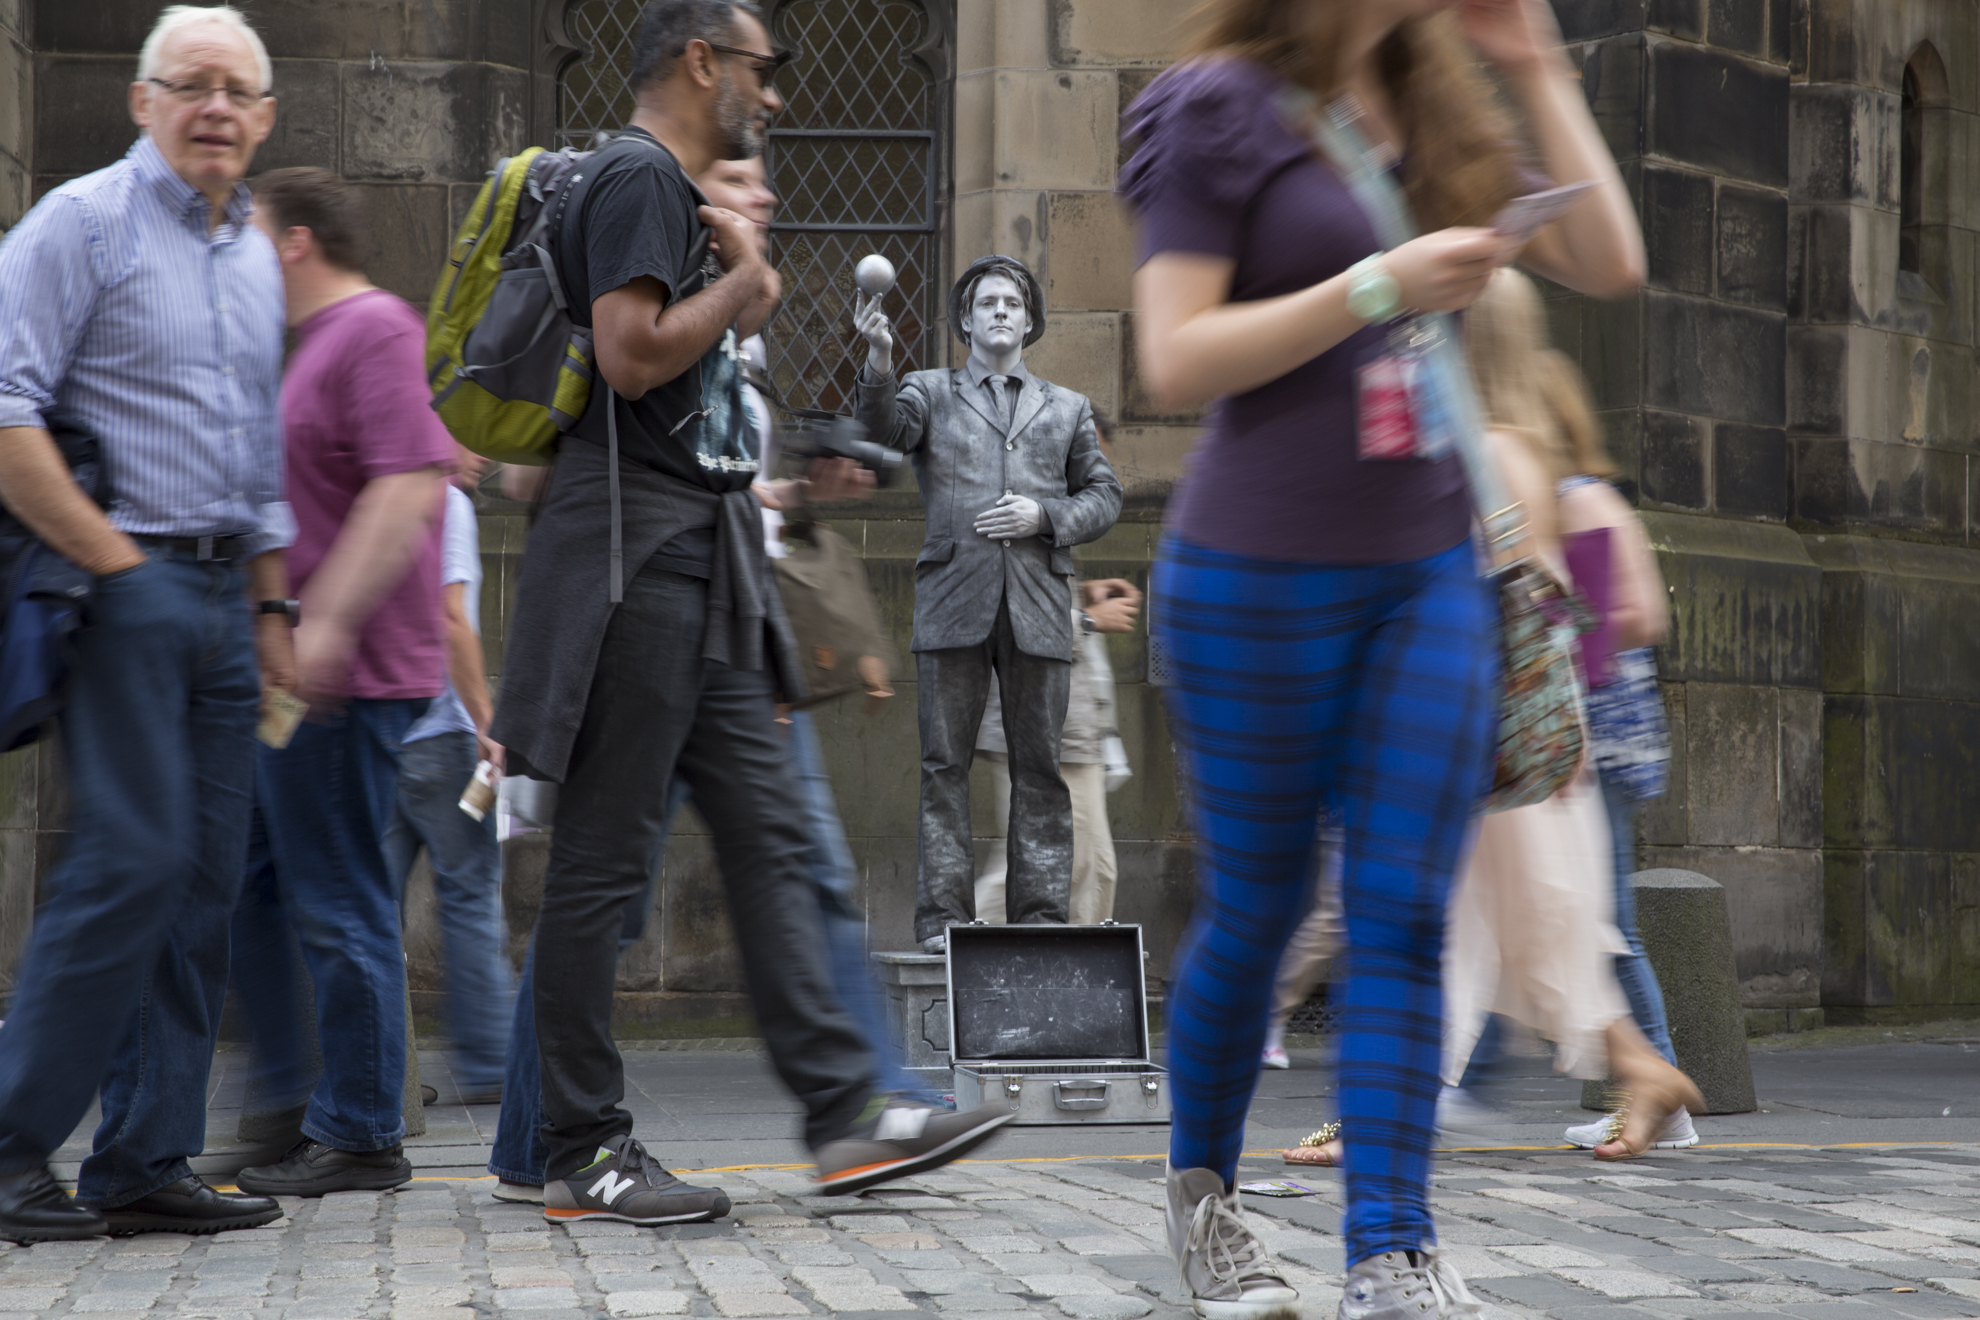  John Godbolt, from Bristol, England, stands in front of St. Giles Cathedral on the Royal Mile during the 2014 Edinburgh Festival of the Fringe in Edinburgh, Scotland.    